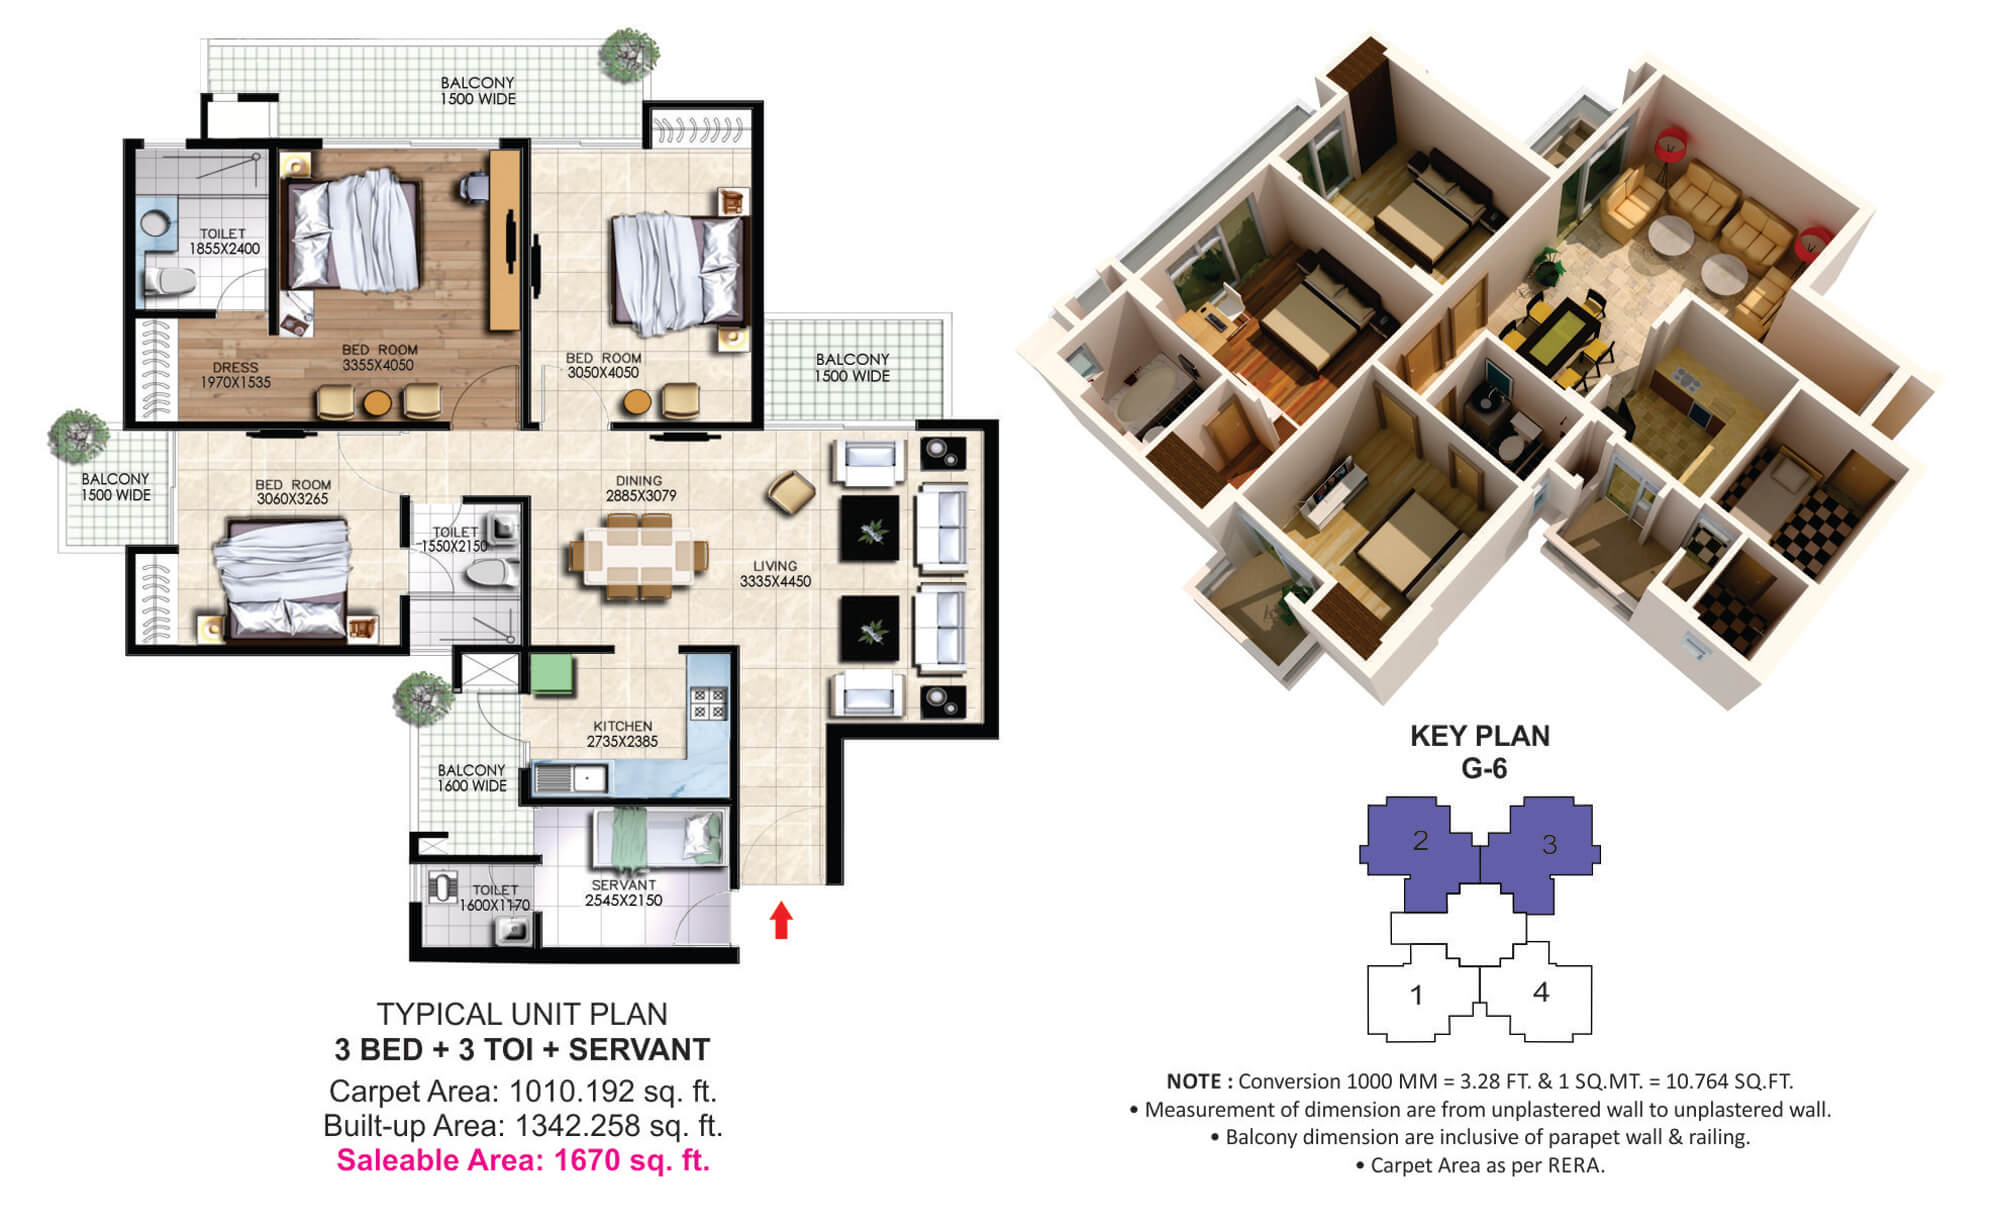 The floor plan size of 3 BHK Flat is 1670 sq ft.